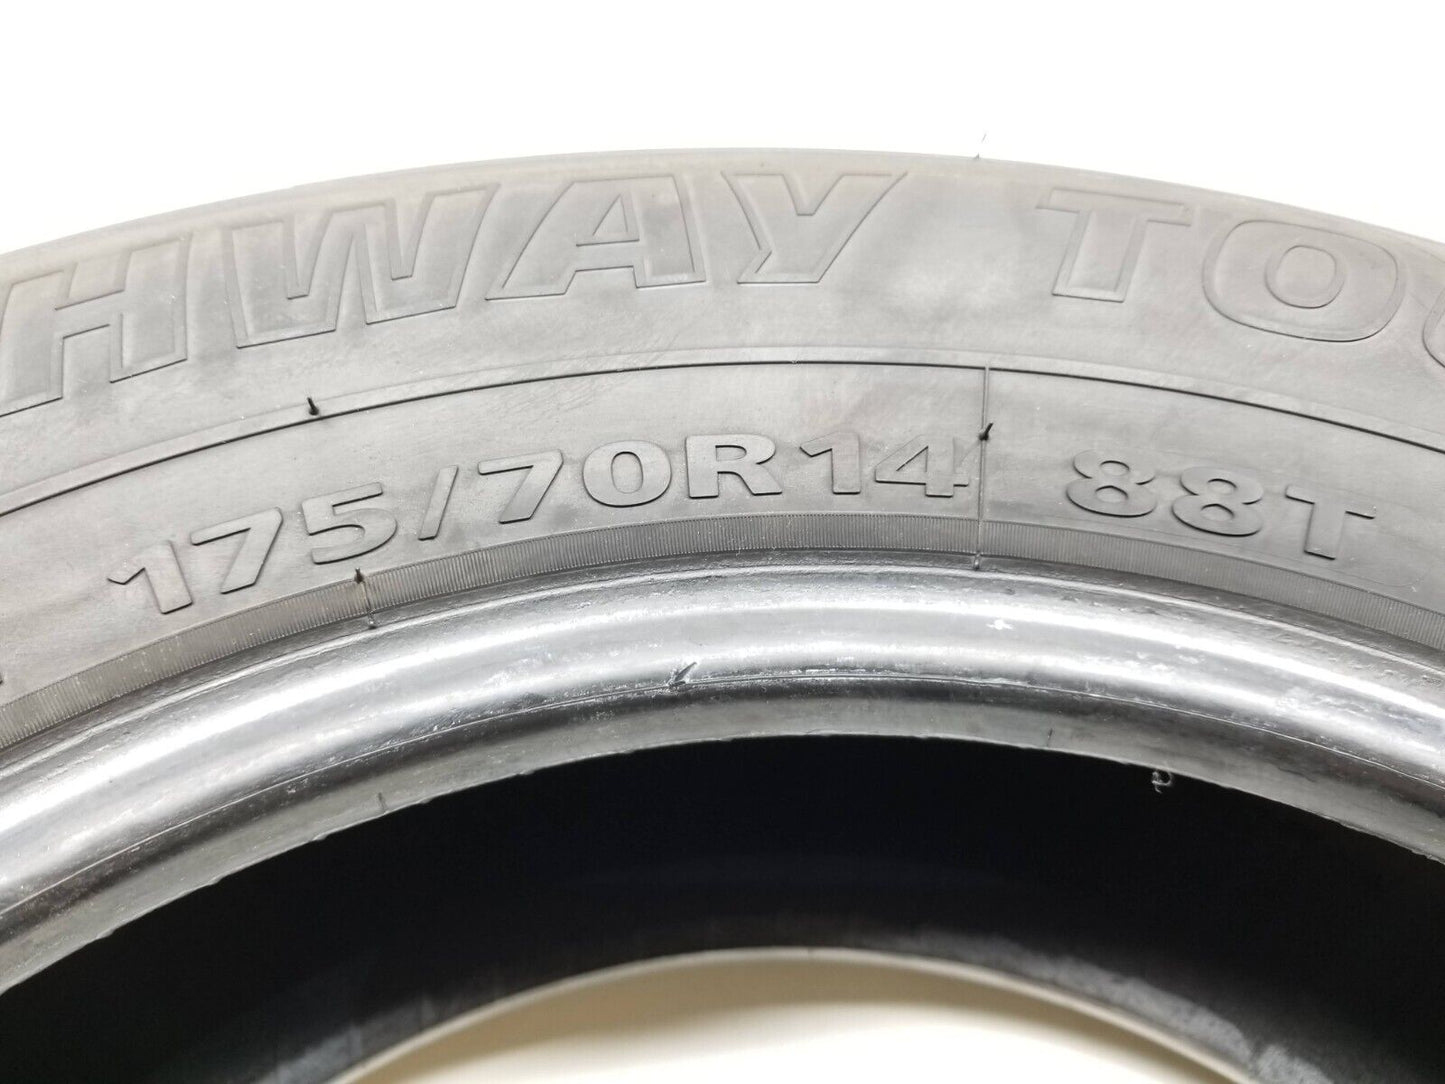 Used Highway Touring Mavis All Seson 175/70 R14 88t Tire 8.5/32"